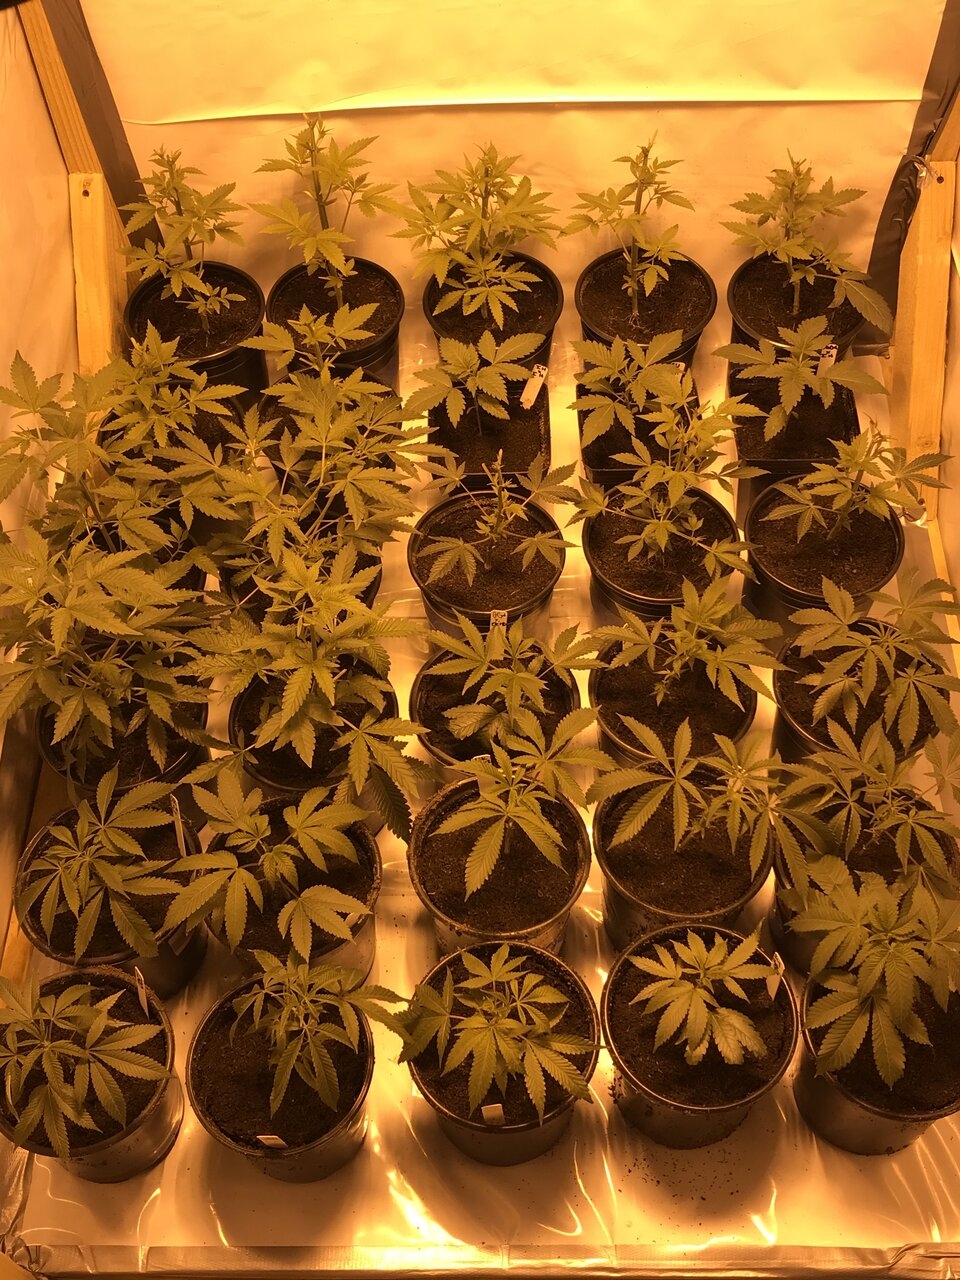 30 pack of all the genetics from last round and this round including the blue sherbert x golden lemons